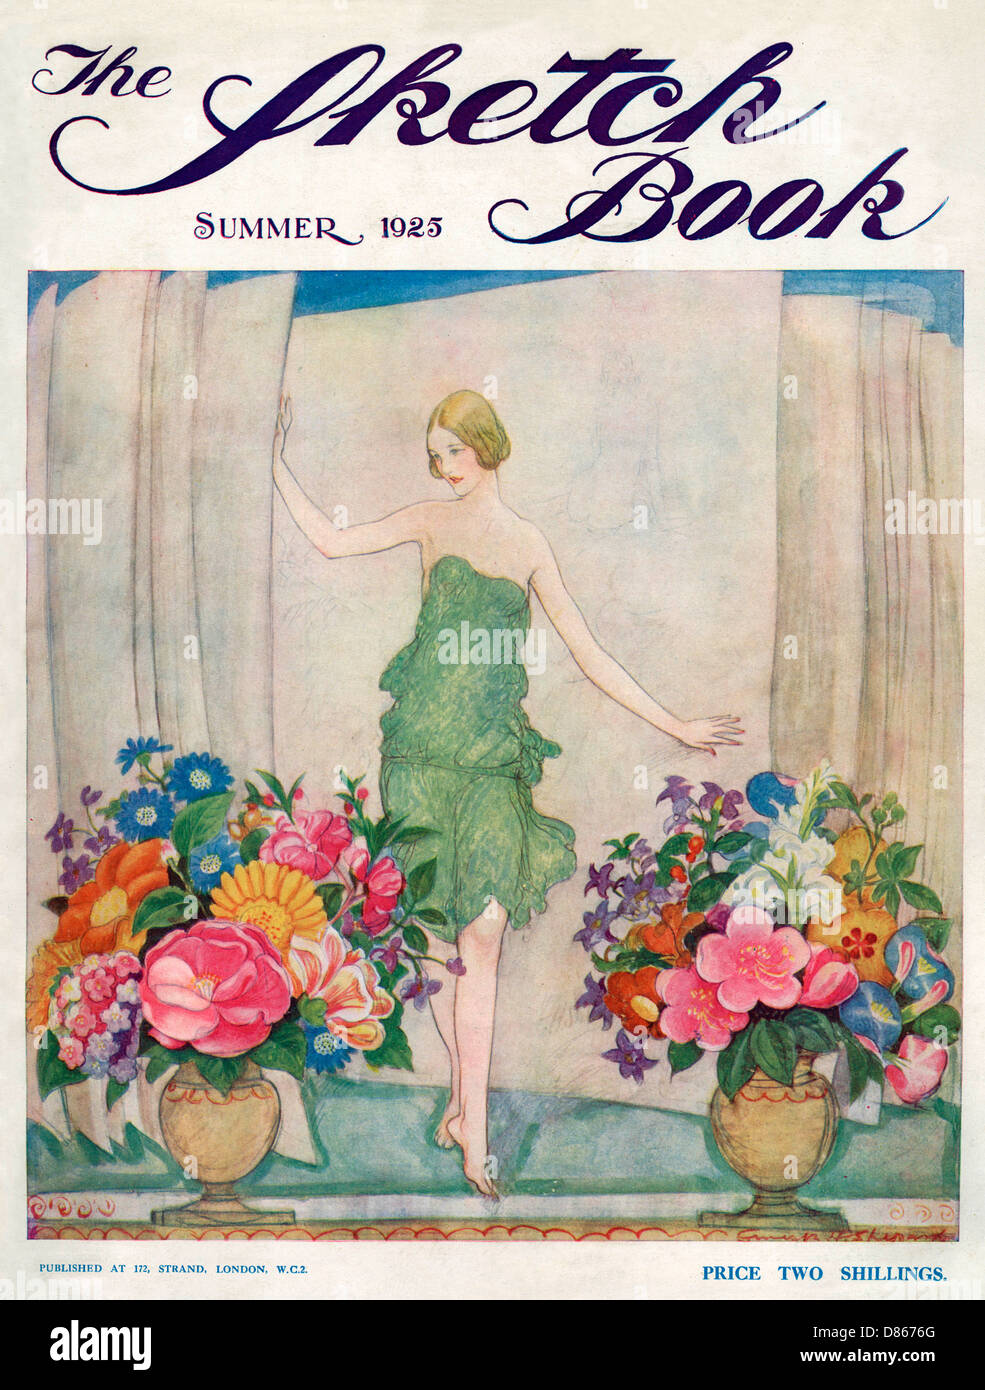 Front cover of the Sketch Book, 1925, by E H Shepherd Stock Photo